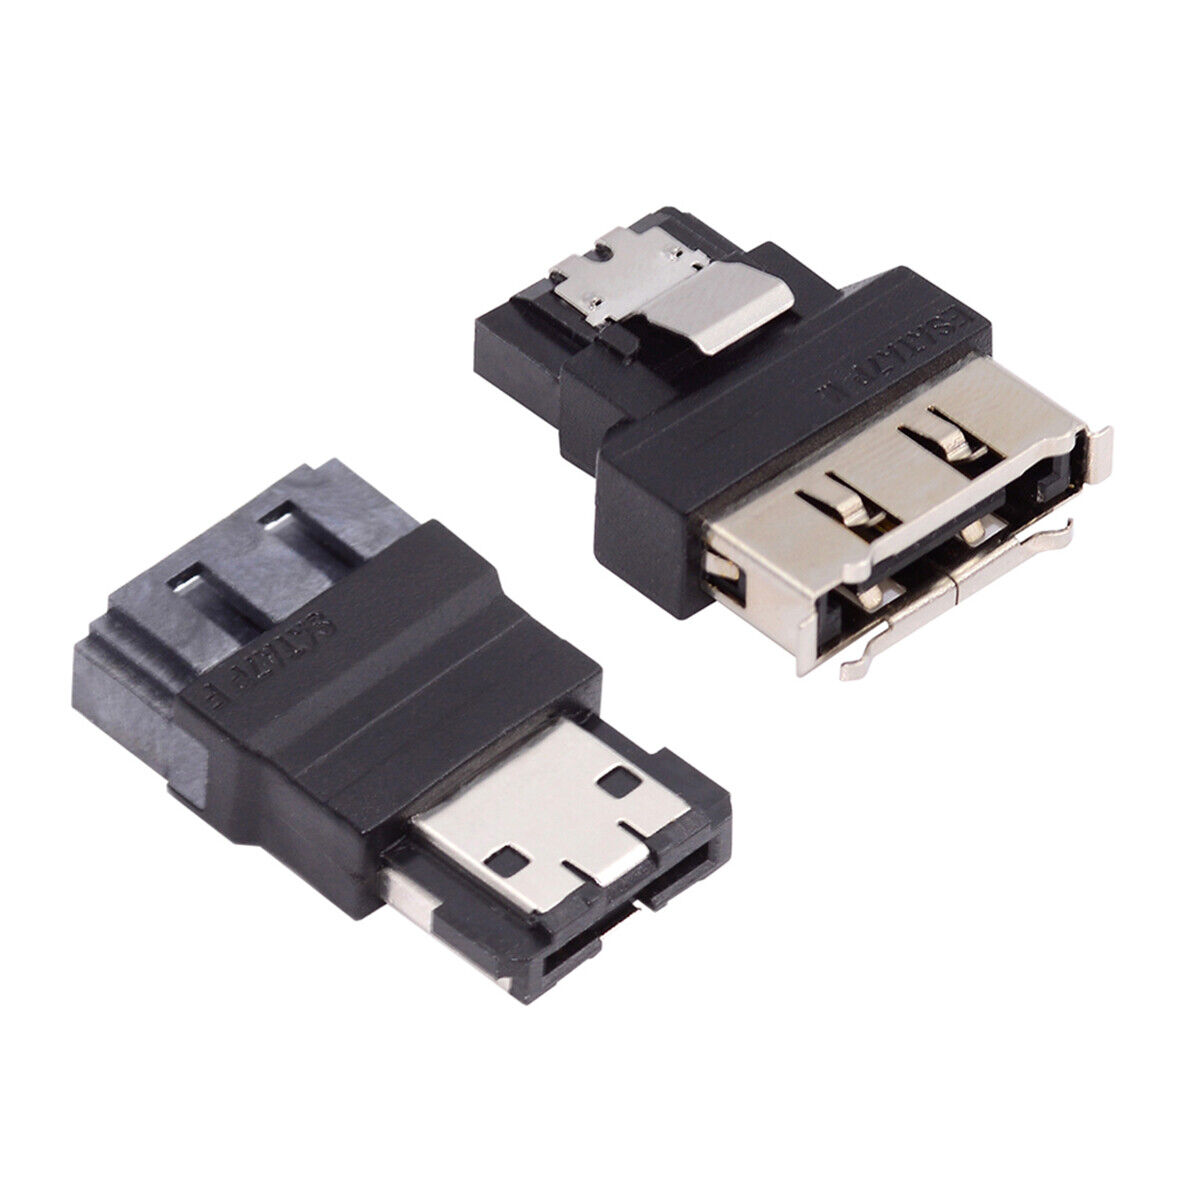 CY 2pcs/lot SATA 7Pin Male to eSATA Connector Female Adapter for SSD Disk